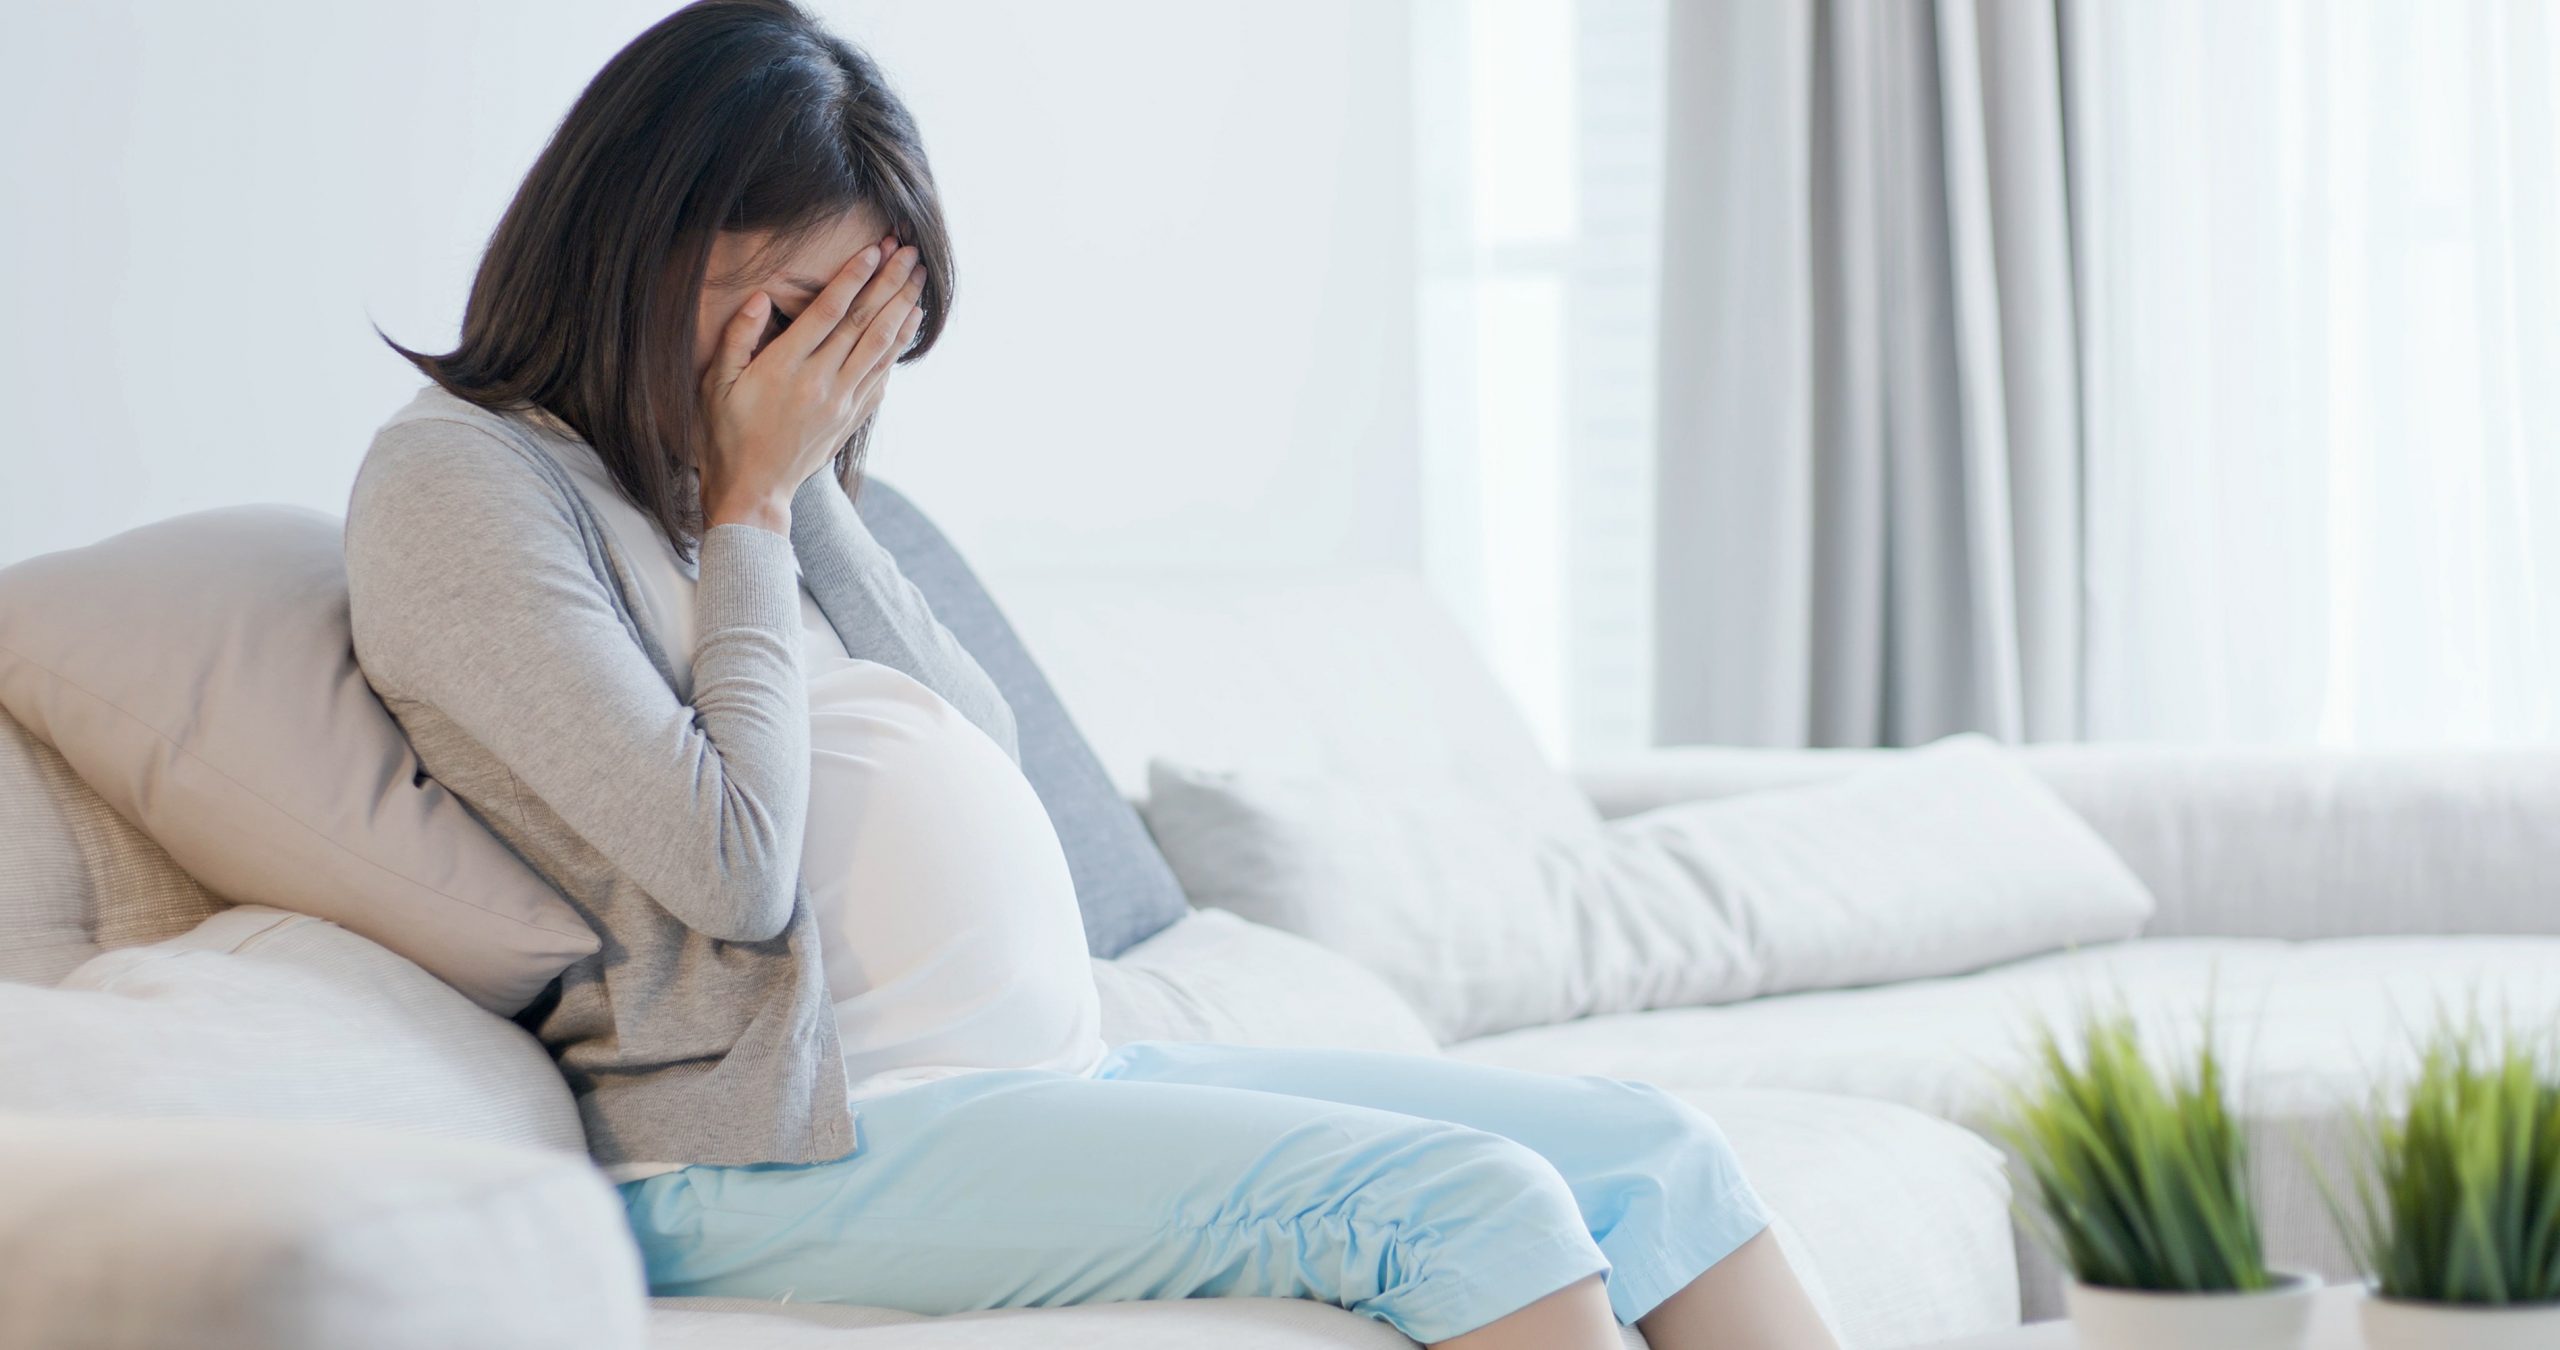 Pregnancy doesn’t ‘cure’ endometriosis, so where does this advice come from?